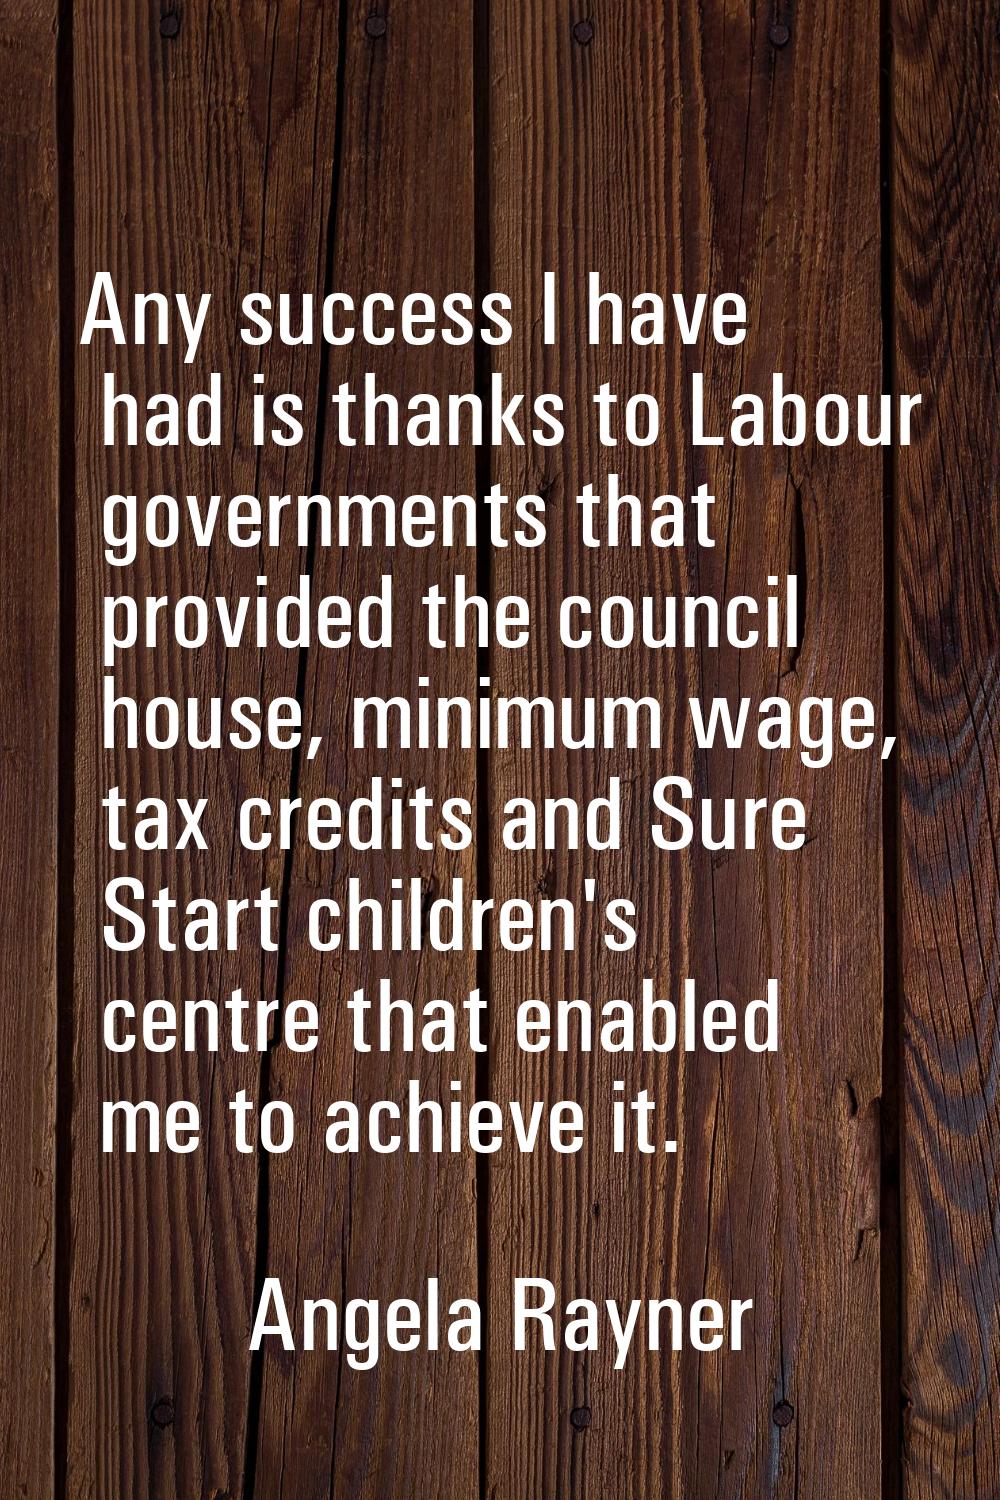 Any success I have had is thanks to Labour governments that provided the council house, minimum wag